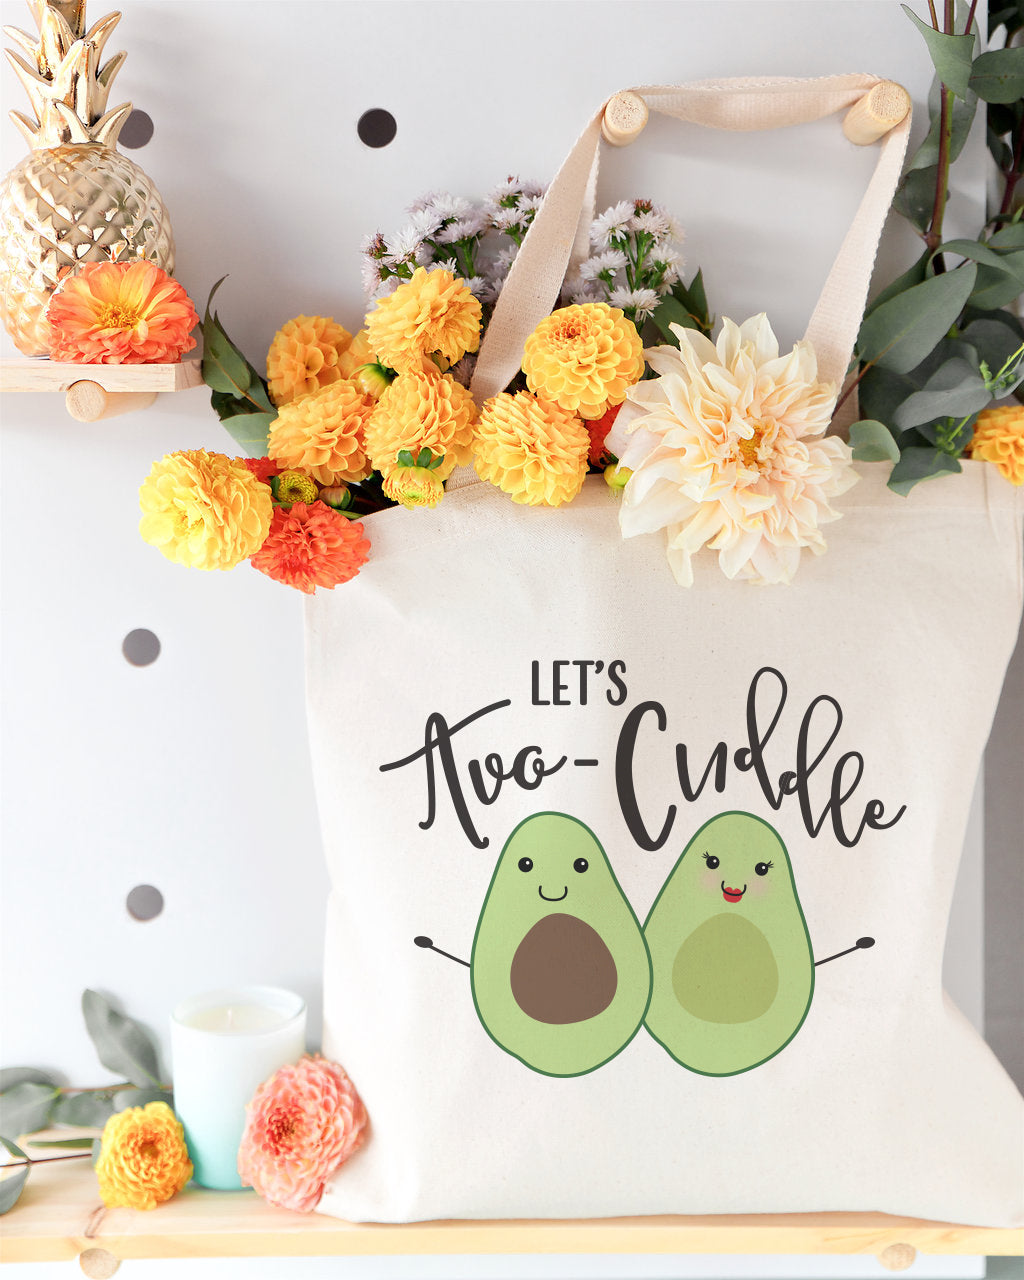 Let's Avo-cuddle Cotton Canvas Tote Bag by The Cotton & Canvas Co.